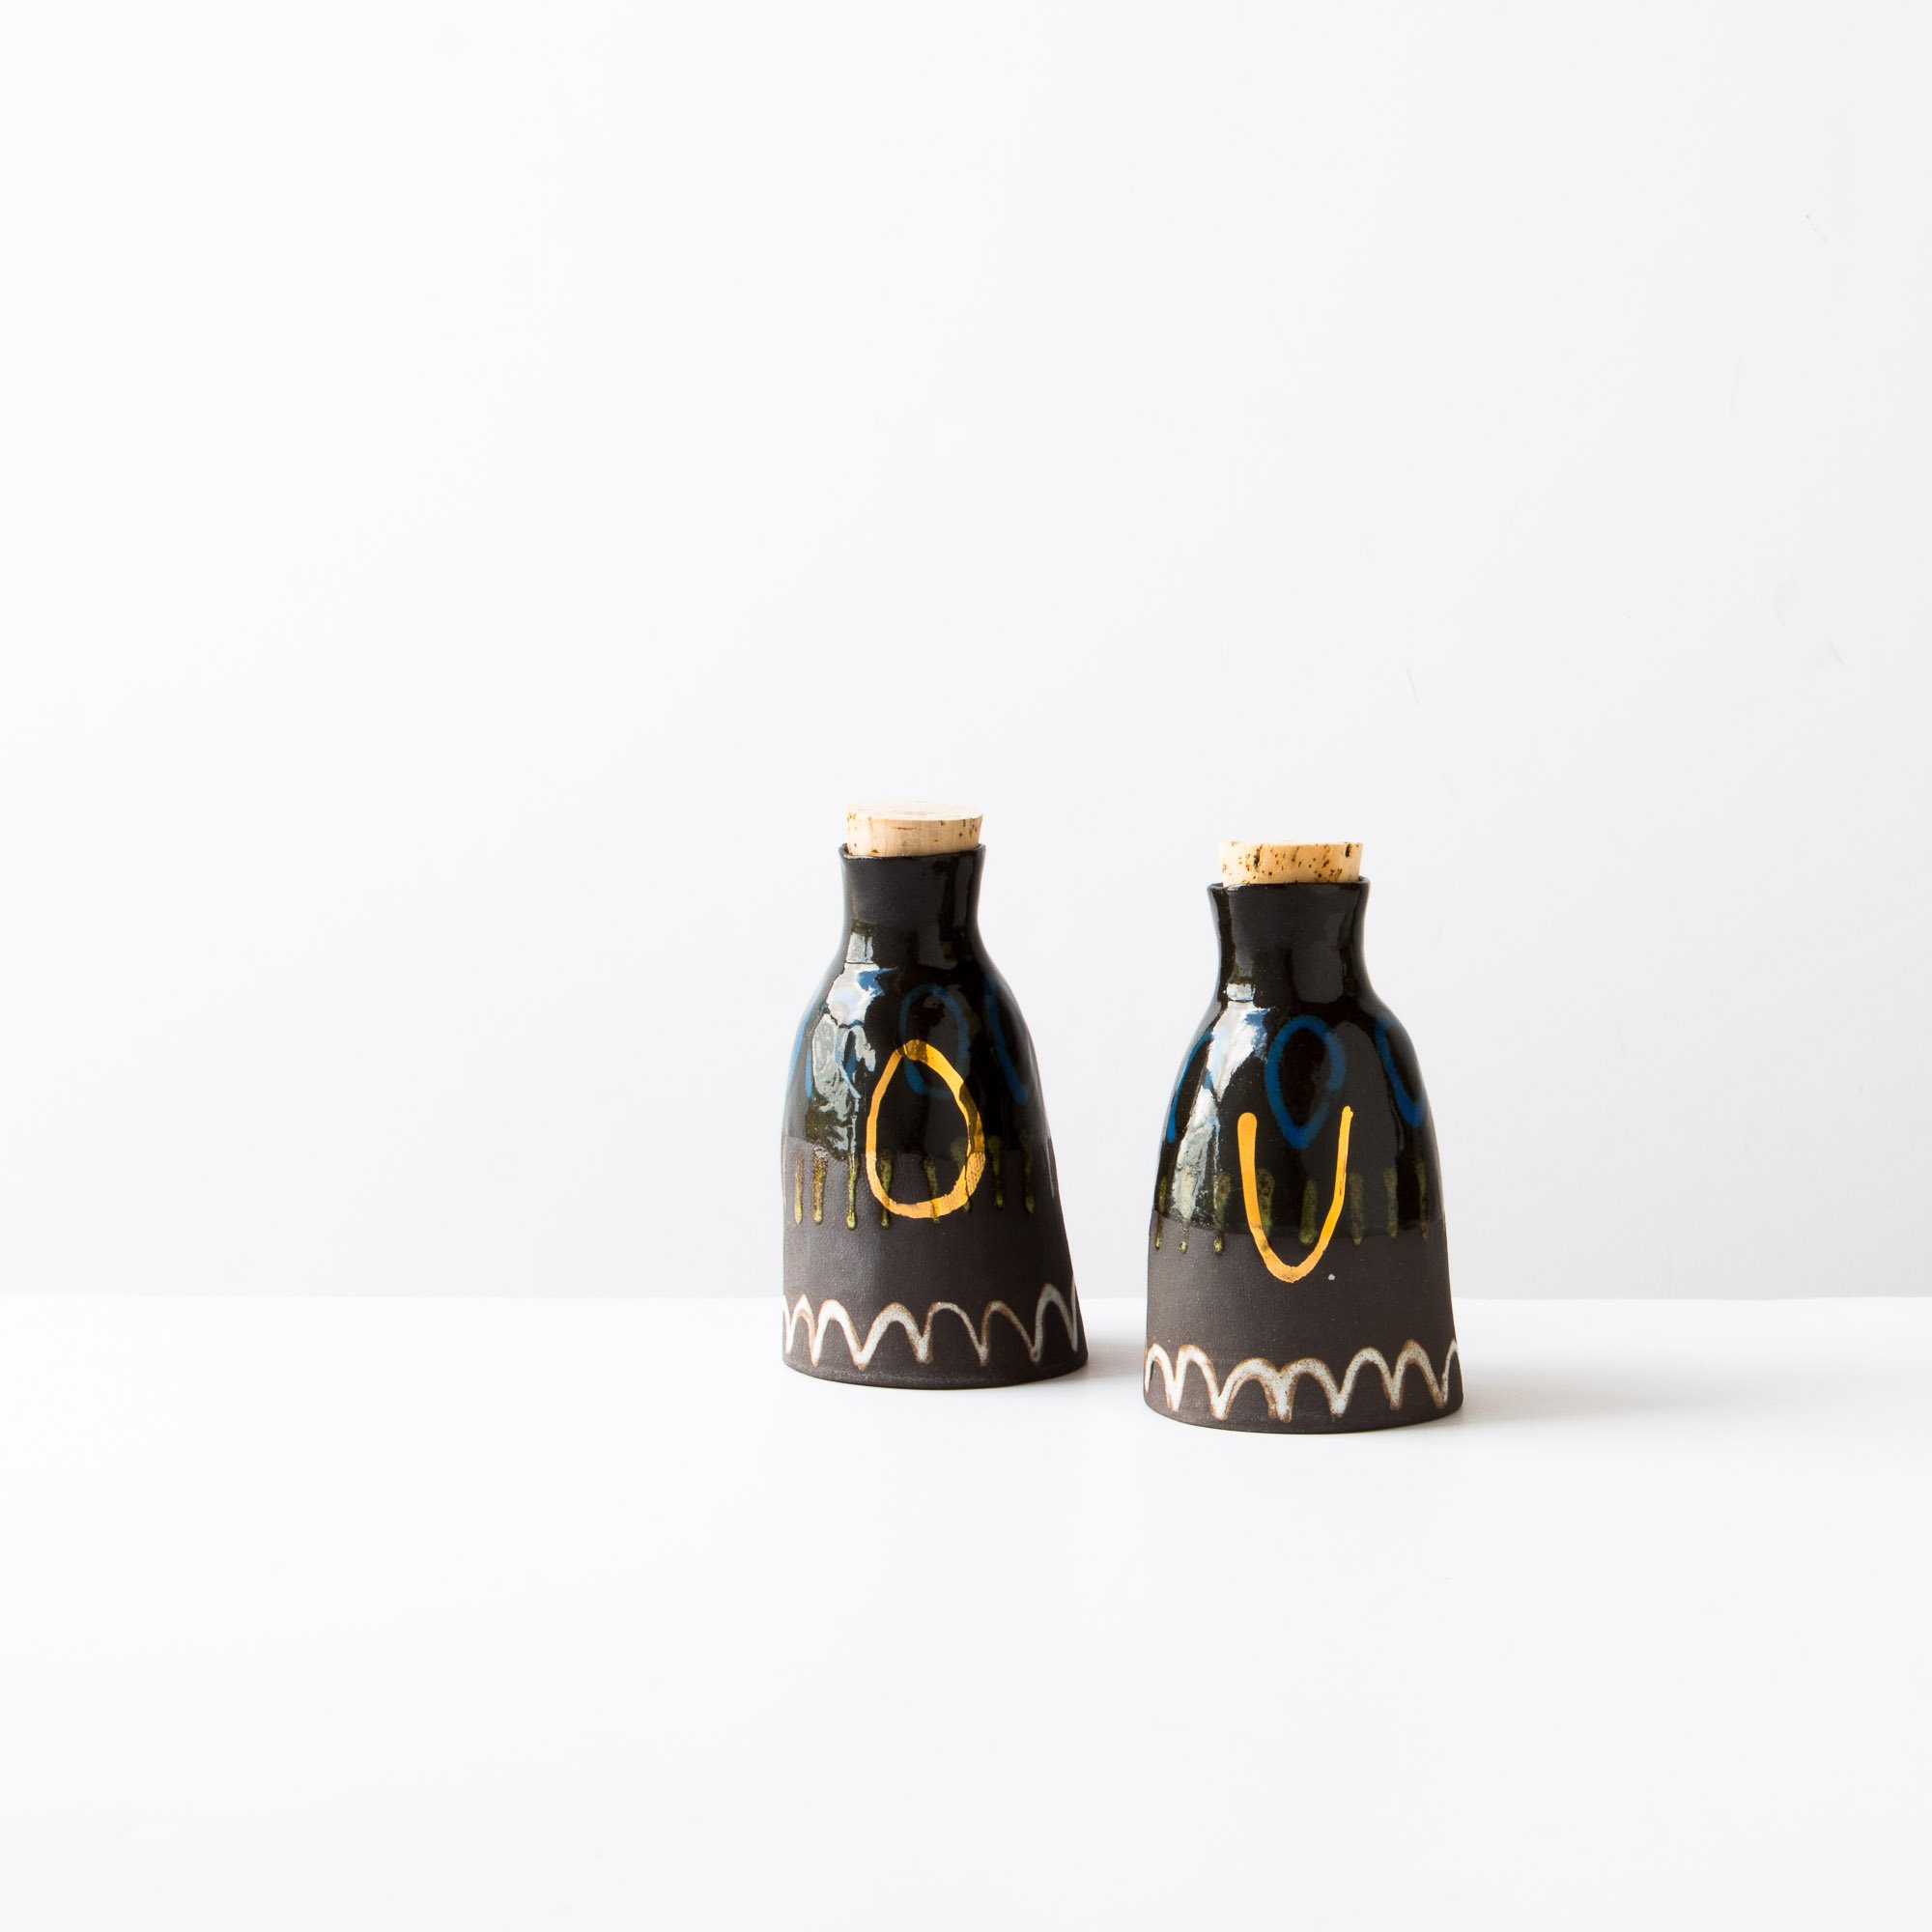 Little Decorated Bottle With Gold Motives - Handmade in Sandstone ...